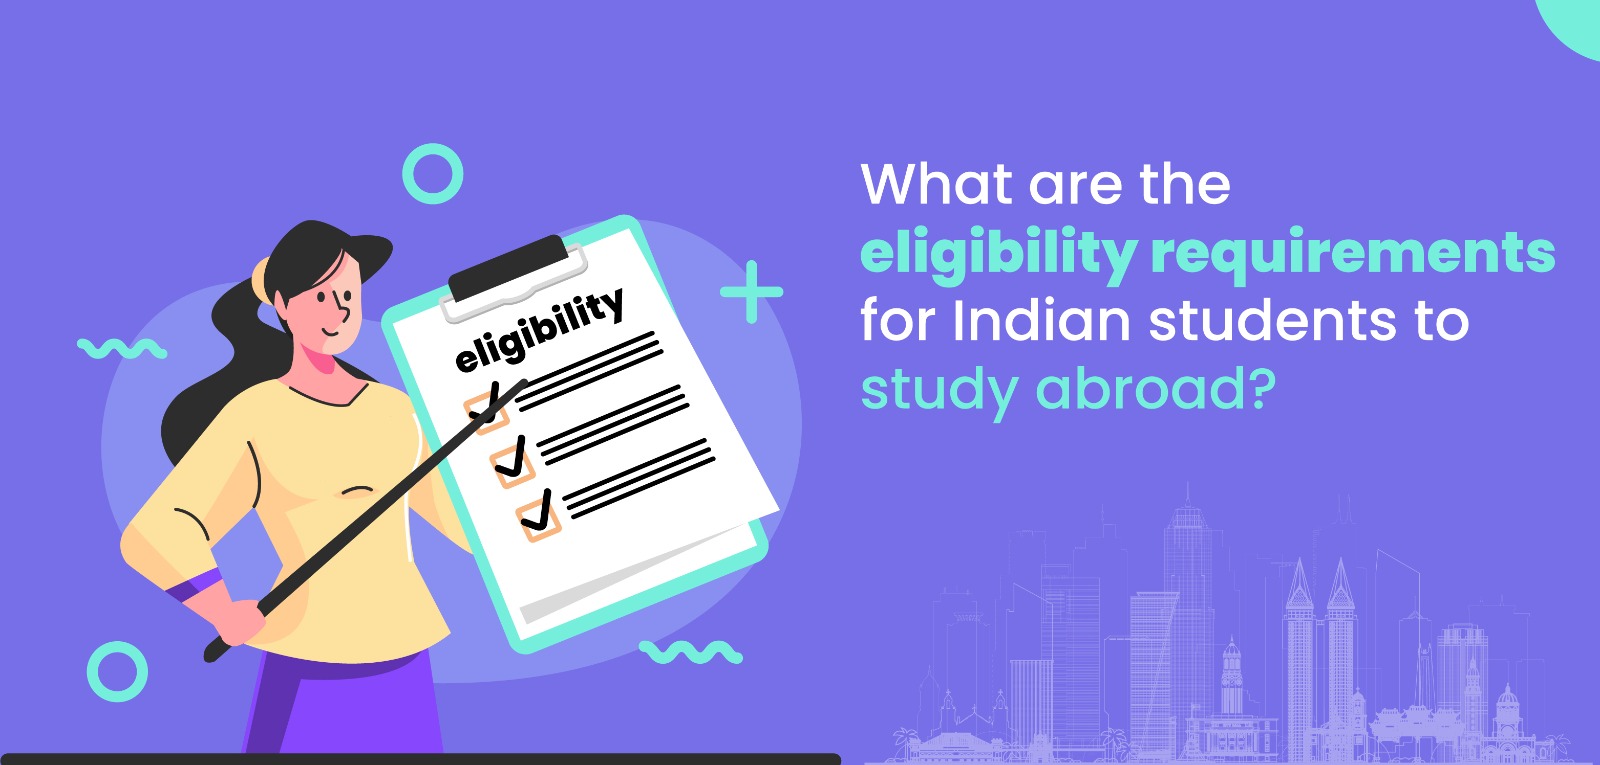 What are the eligibility requirements for Indian students to study abroad?